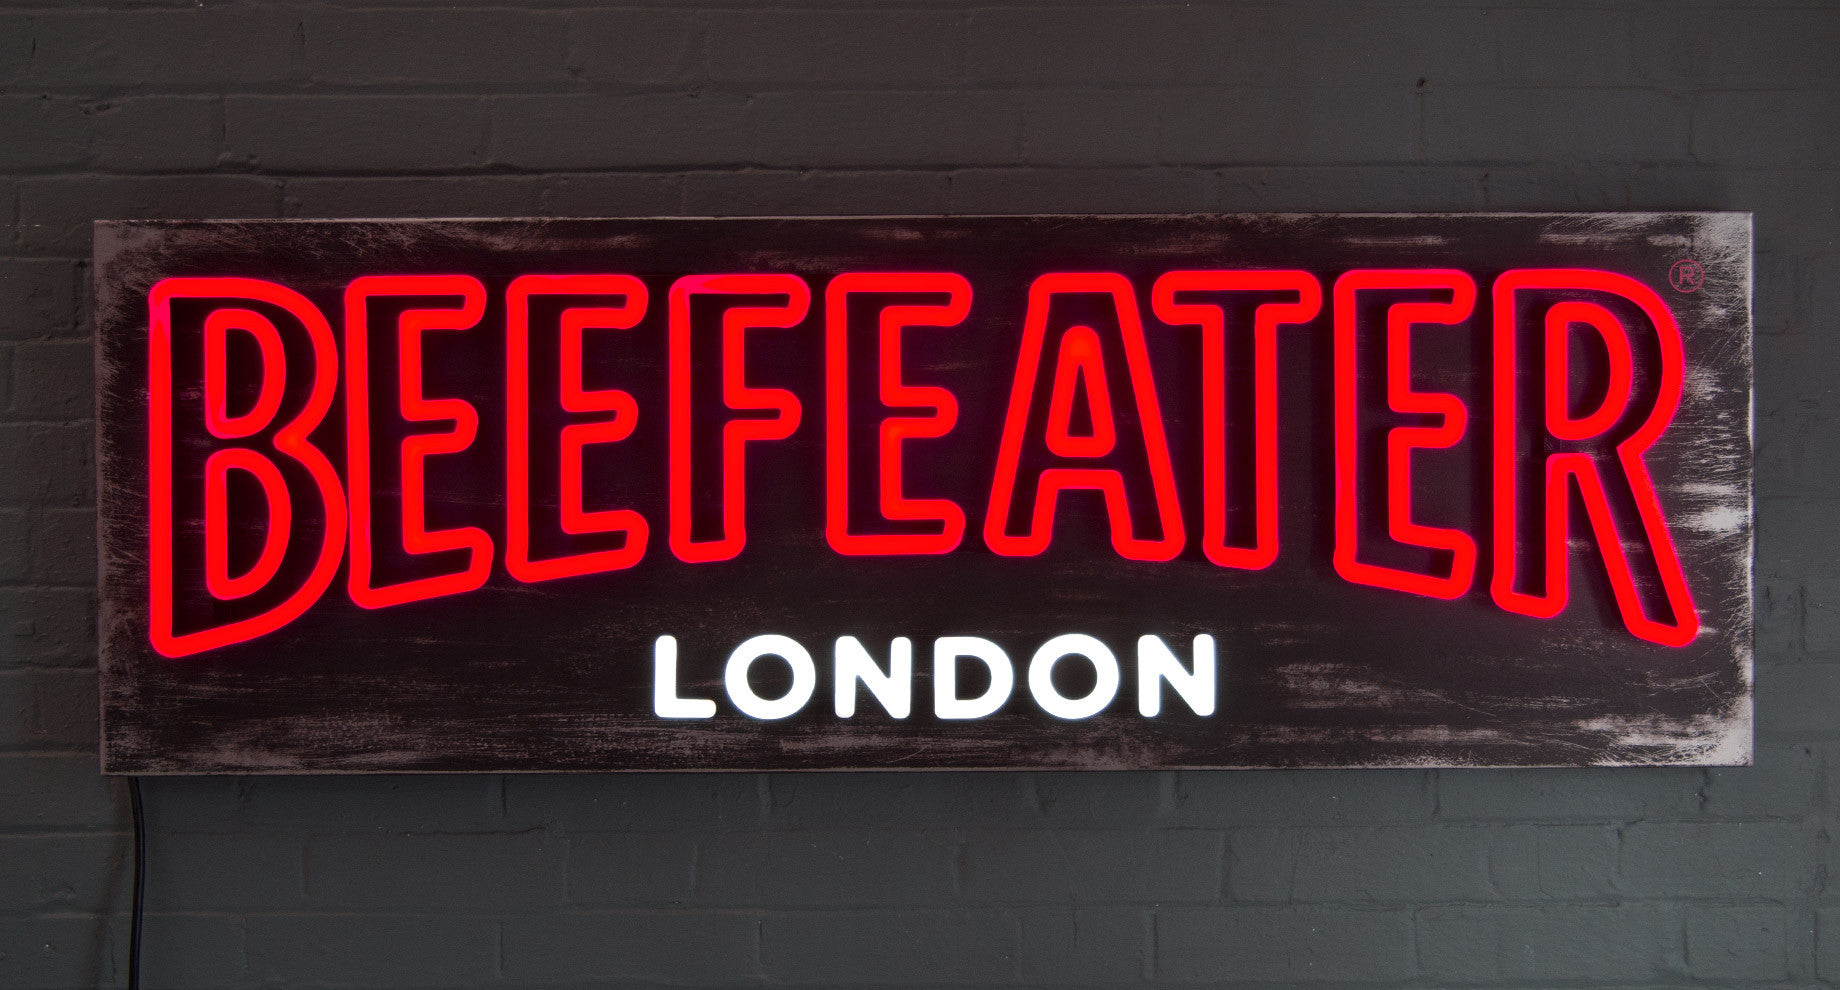 Beefeater LED neon sign